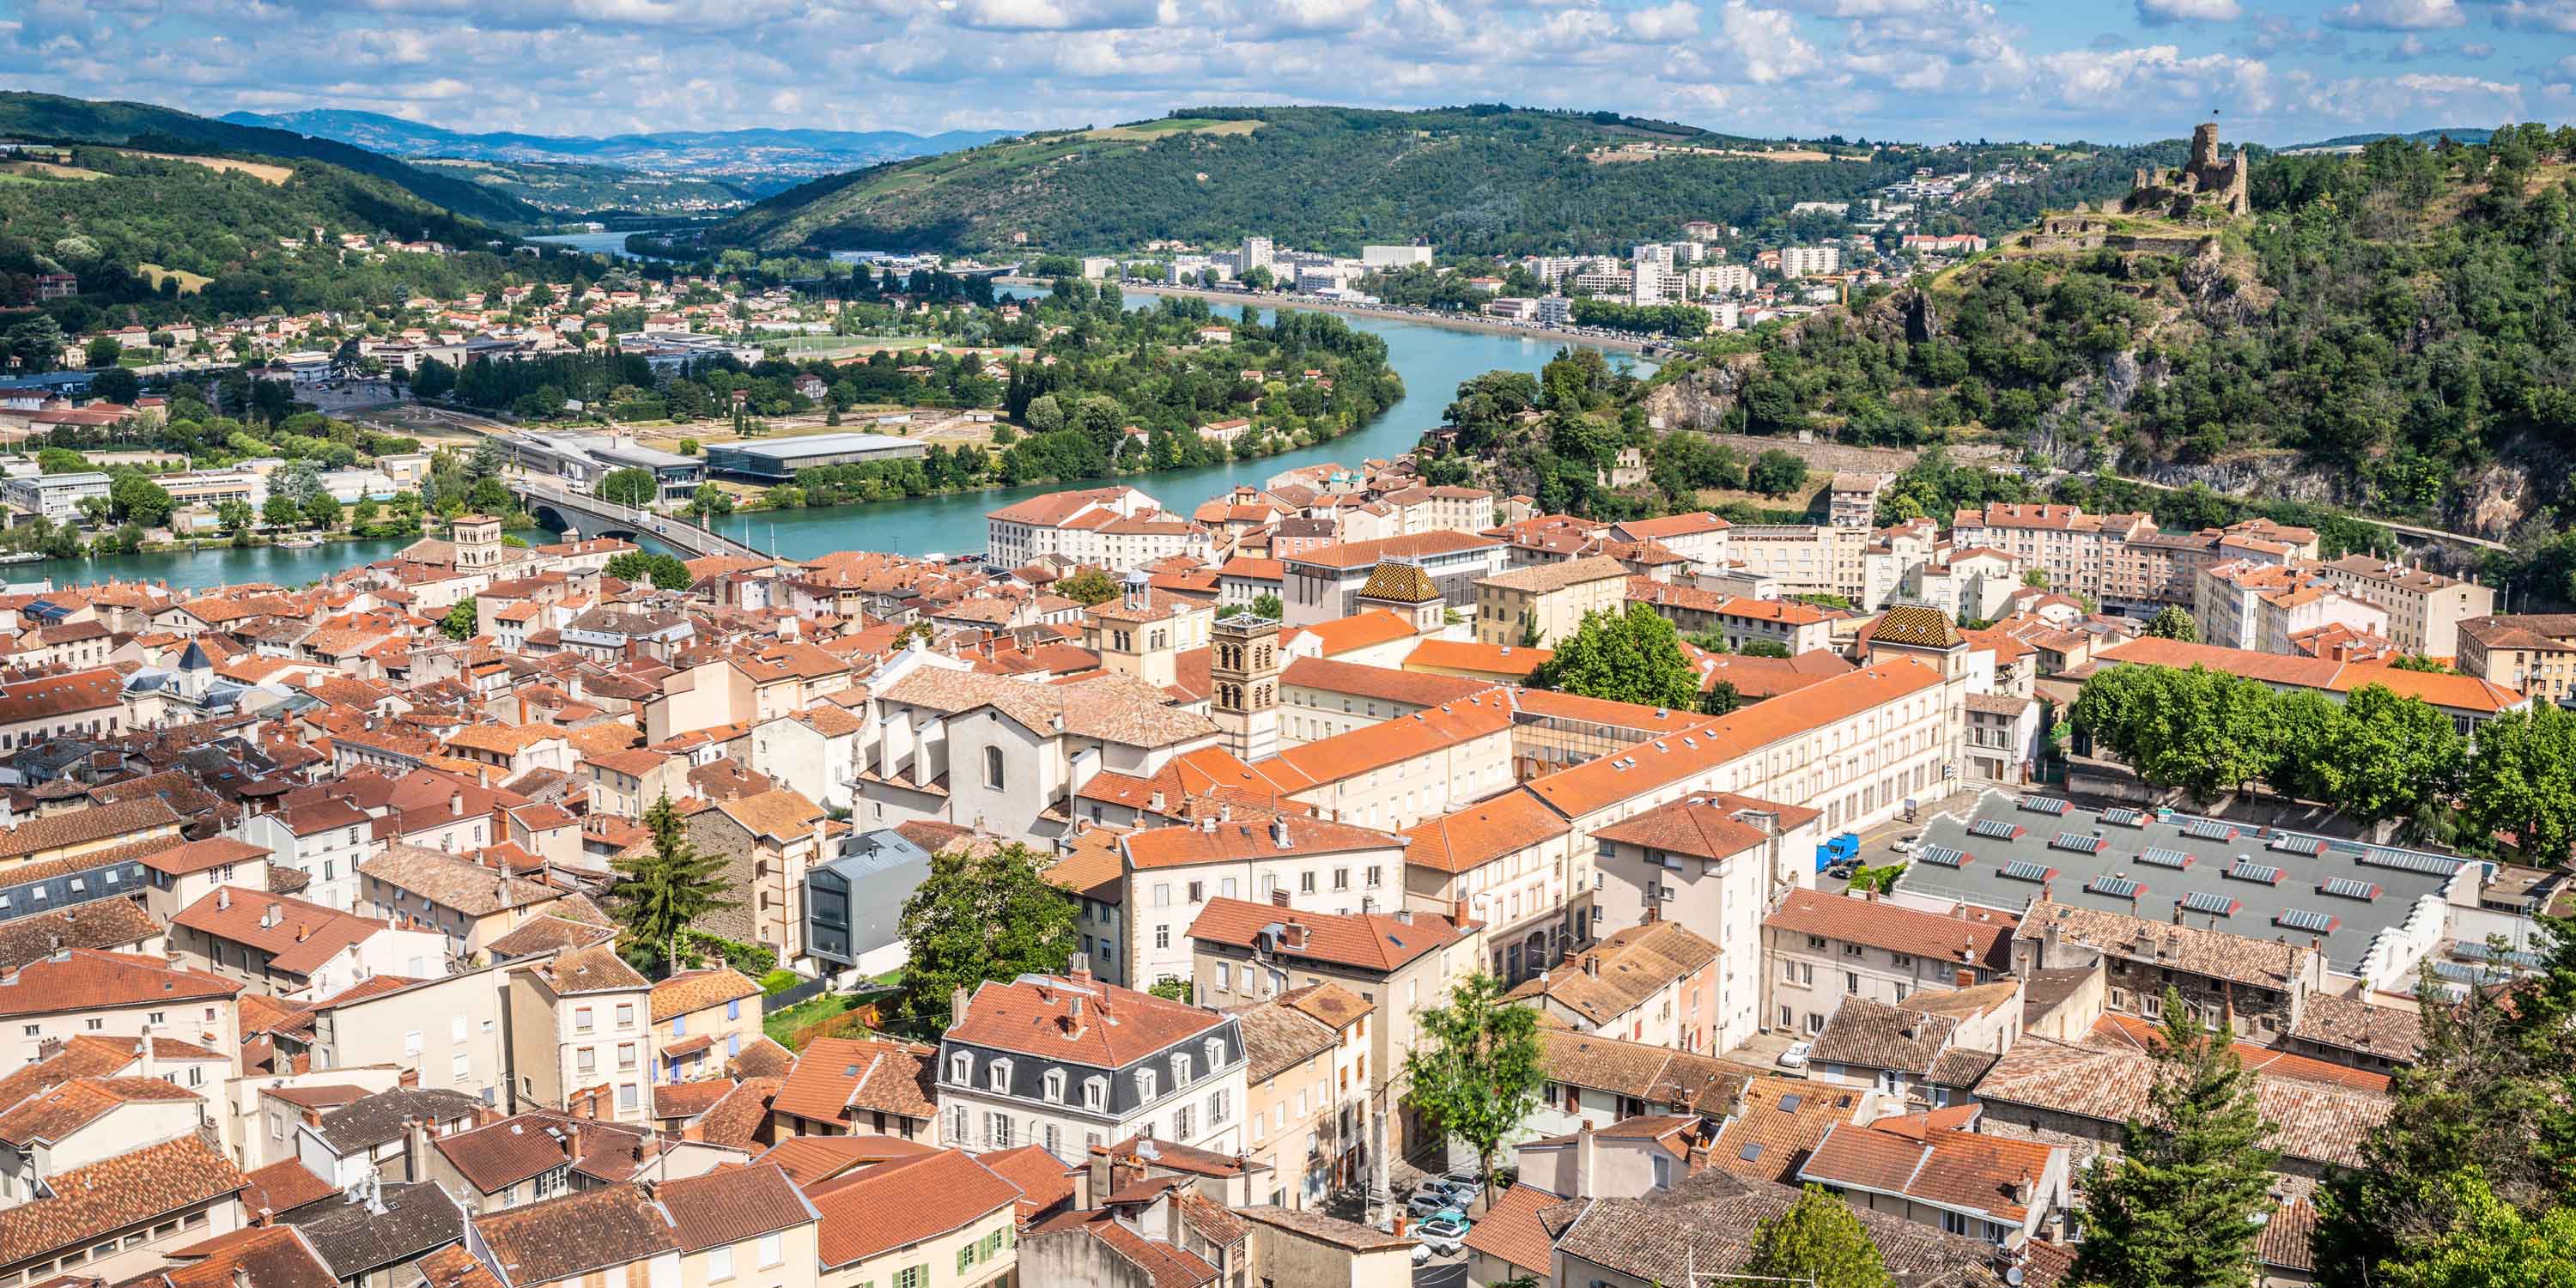 Overlooking the city of Vienne Isere in France with red roofs and a river